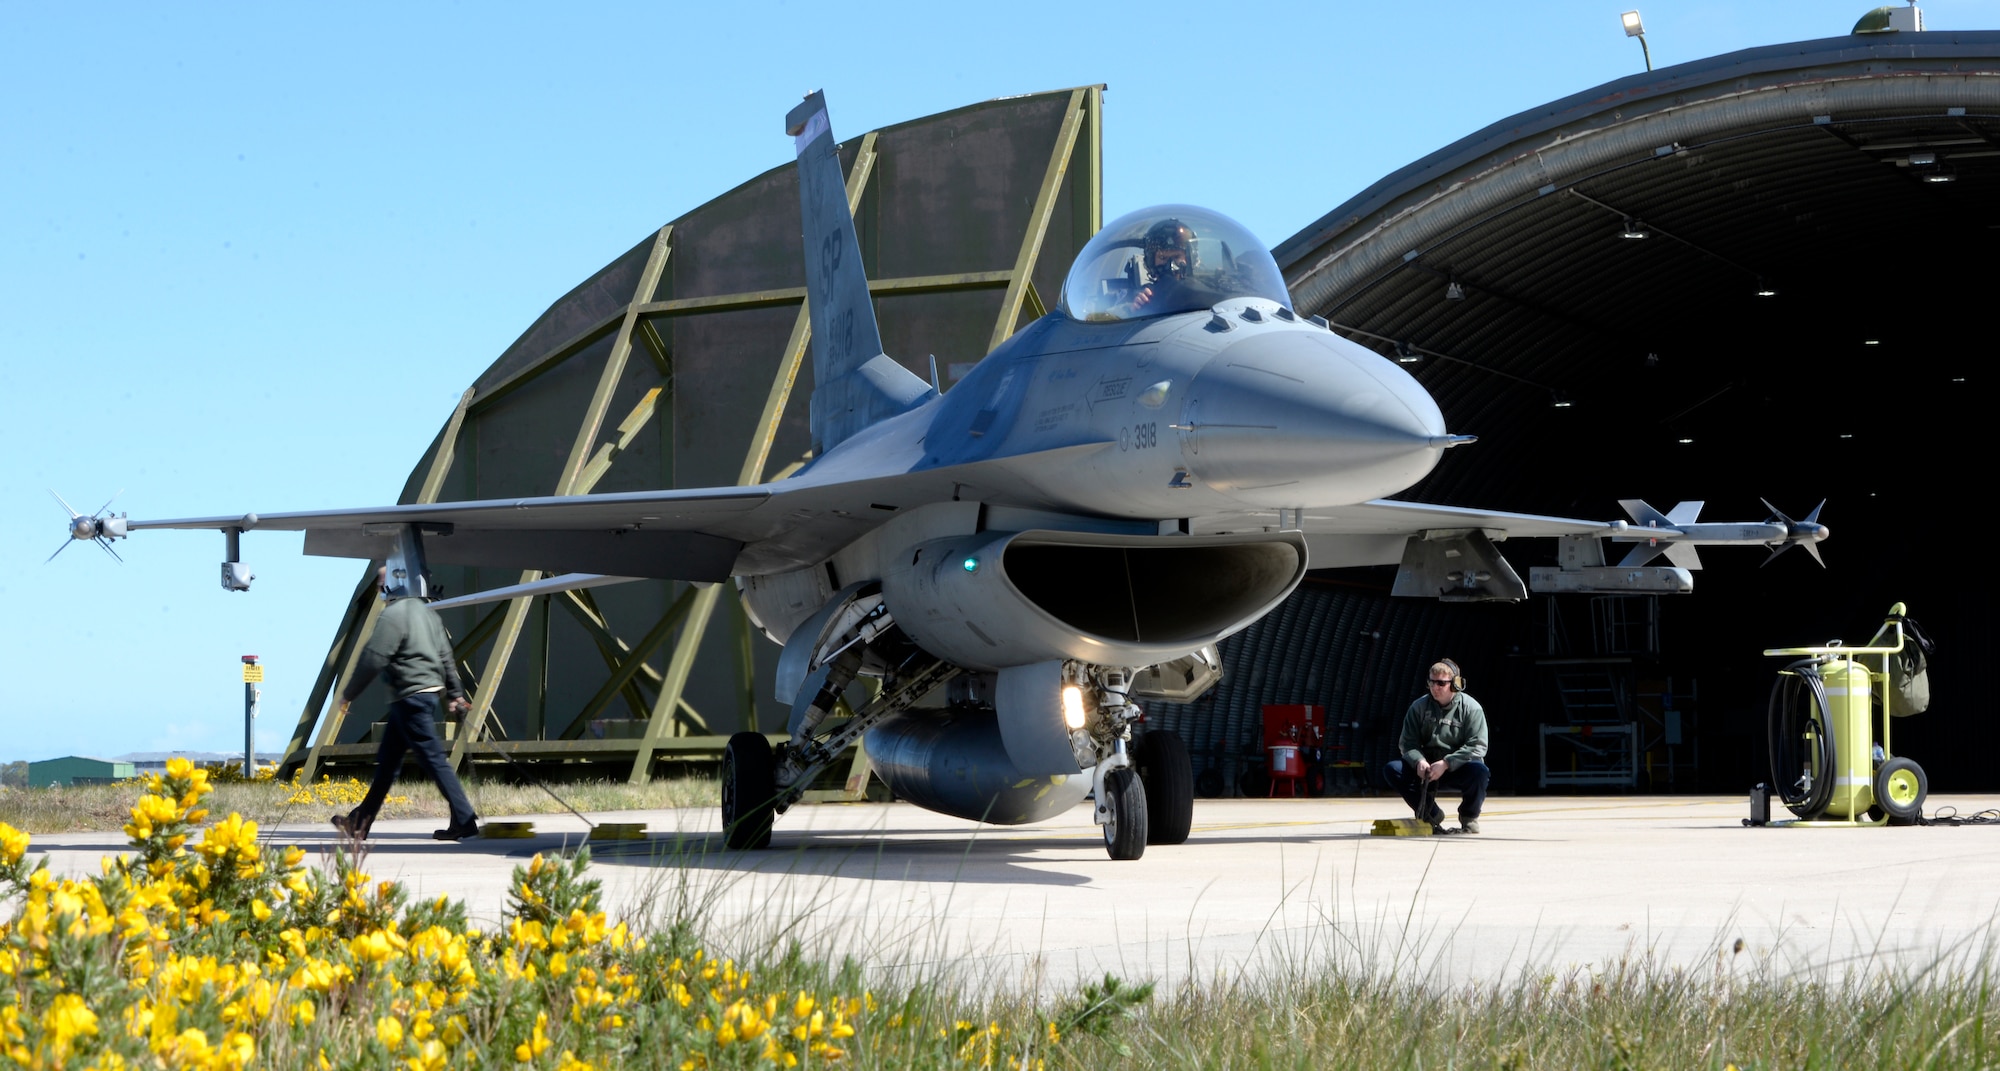 U.S. Air Force Airmen from the 52nd Aircraft Maintenance Squadron, Spangdahlem Air Base, Germany, perform the final pre-flight procedures before launching an F-16 Fighting Falcon, flown by U.S. Air Force Major Kevin Bunten, 480th Fighter Squadron Assistant Director of Operations, on a low-level training sortie at RAF Lossiemouth, Scotland, May 7, 2019, during exercise Formidable Shield. Formidable Shield is a U.S.-led exercise, conducted by Naval Striking and Support Forces NATO. The purpose of the training is to improve allied interoperability in a live-fire integrated air and missile defense exercise. (U.S. Air Force photo by Master Sgt. Austin M. May)